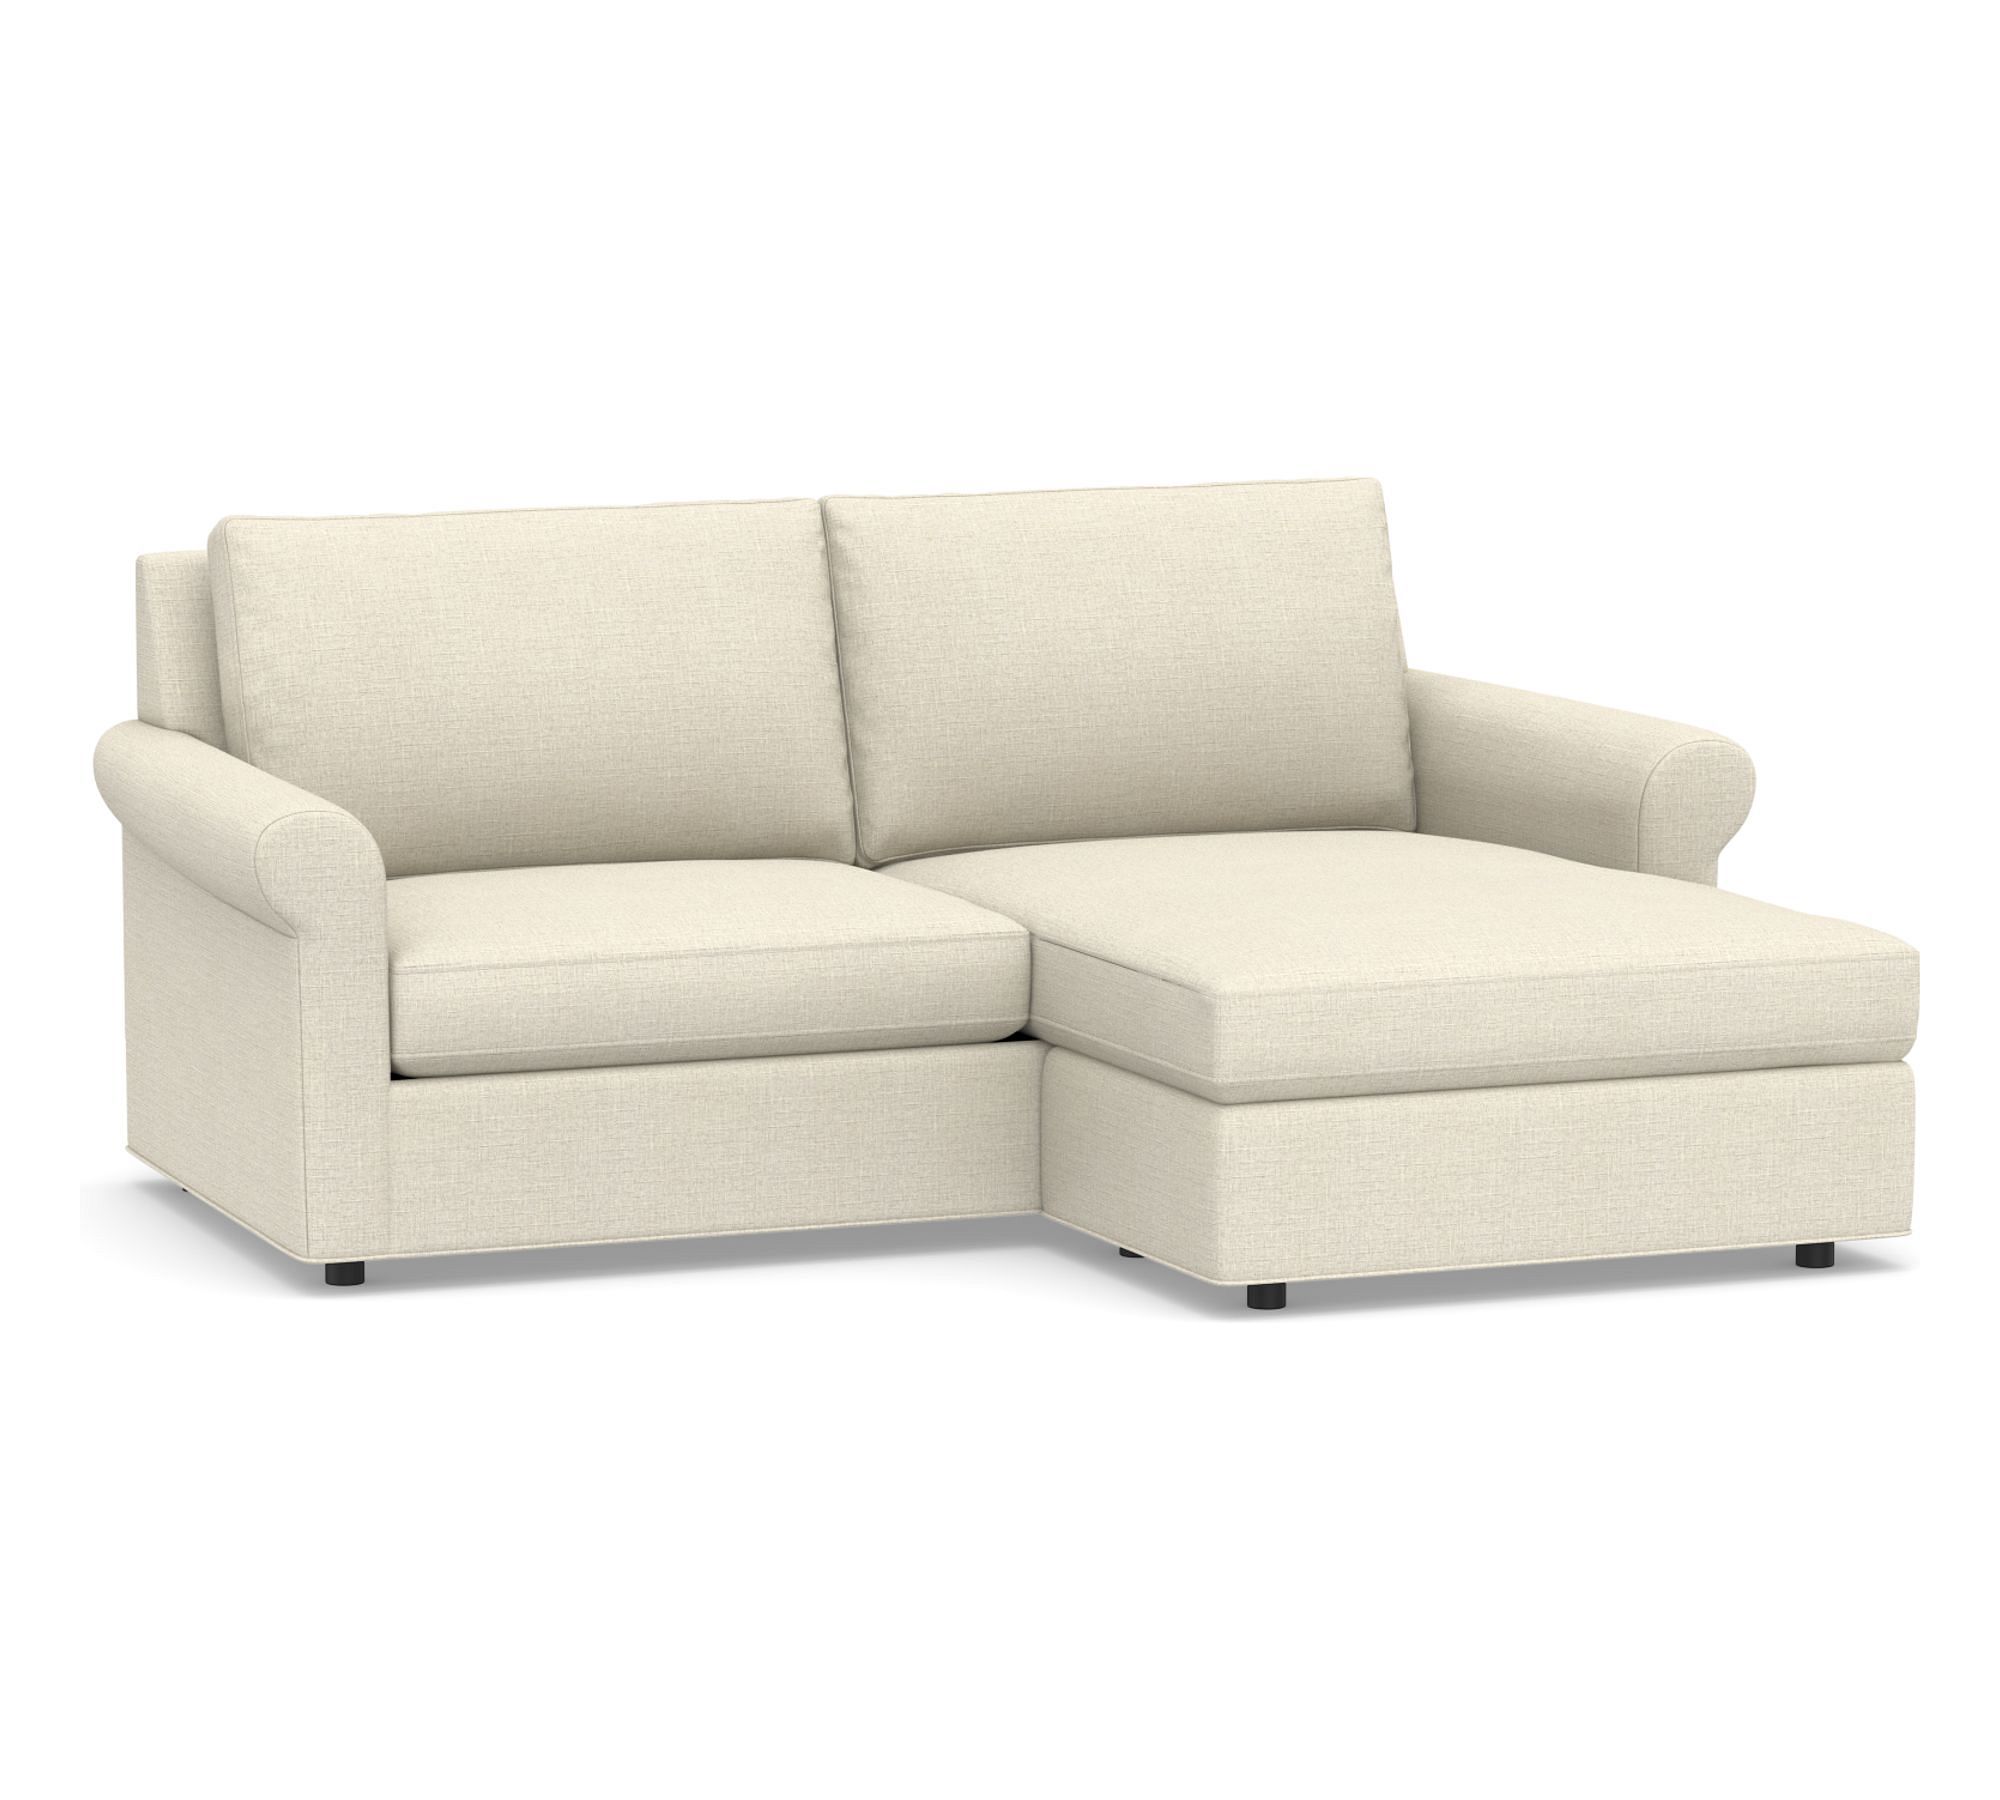 Sanford Roll Arm Reversible Sleeper Chaise Sectional - Storage Available (83")